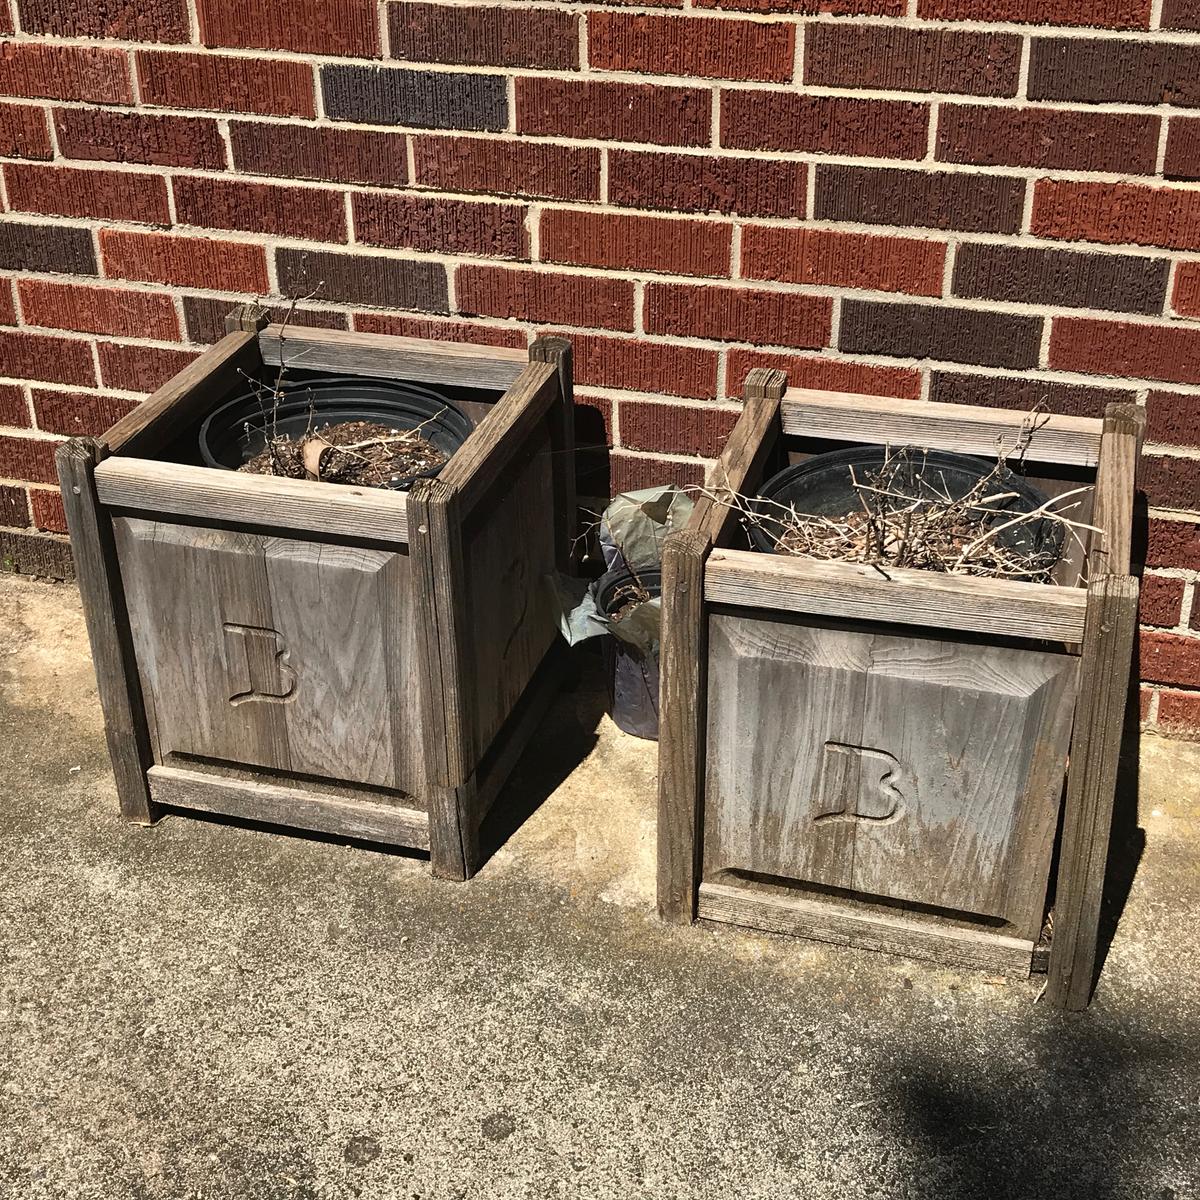 Pair of Wooden Outdoor Plant Boxes with “B” Etched Sides